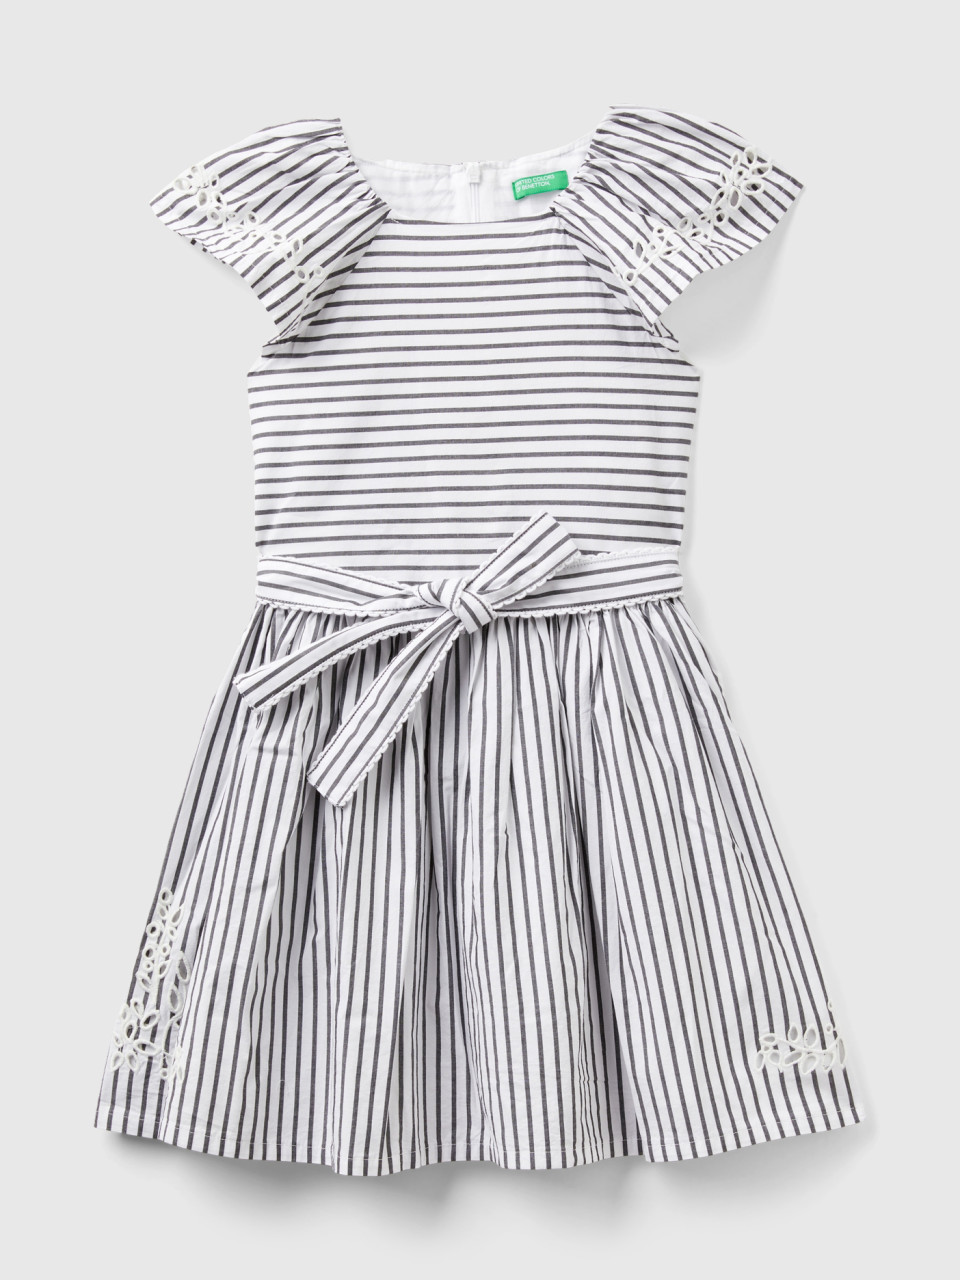 Benetton, Striped Dress With Embroidery, Black, Kids